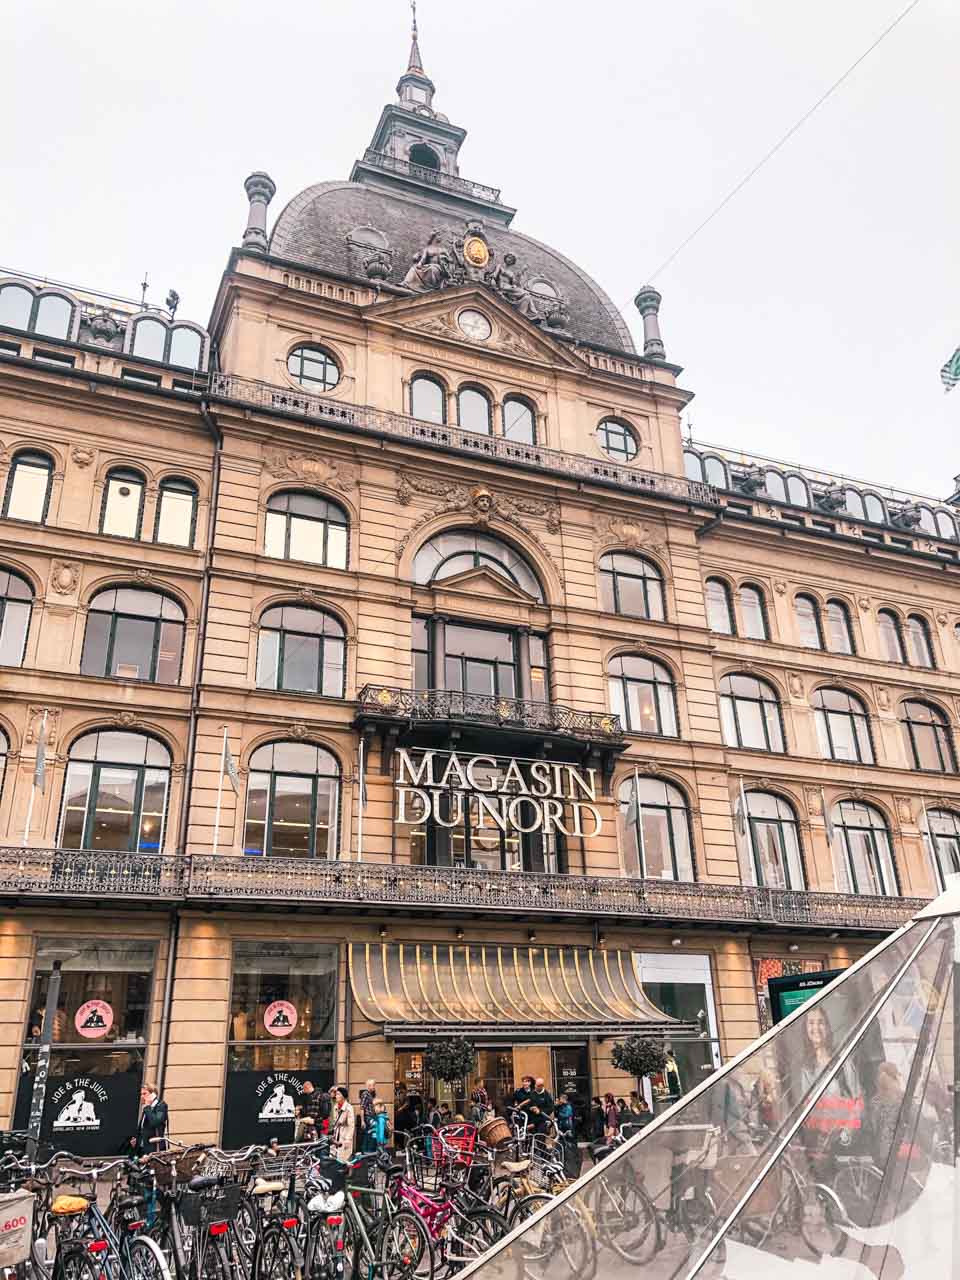 The outside of Magasin du Nord, a large department store in Copenhagen, Denmark